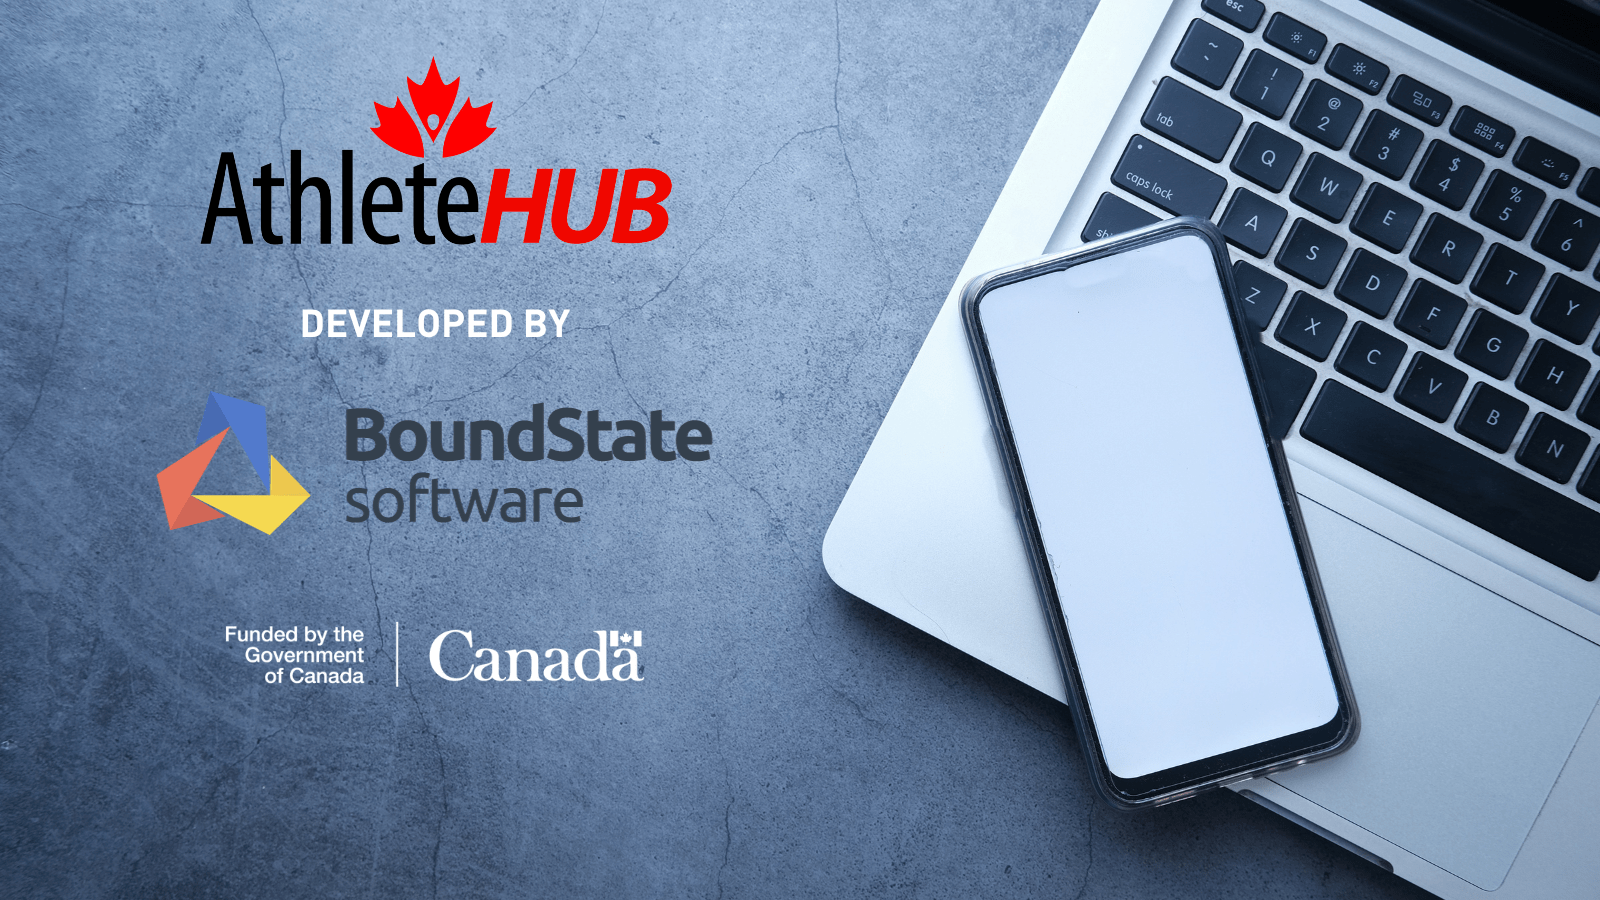 AthleteHUB Developed by Bound State Software. Funded by the Government of Canada